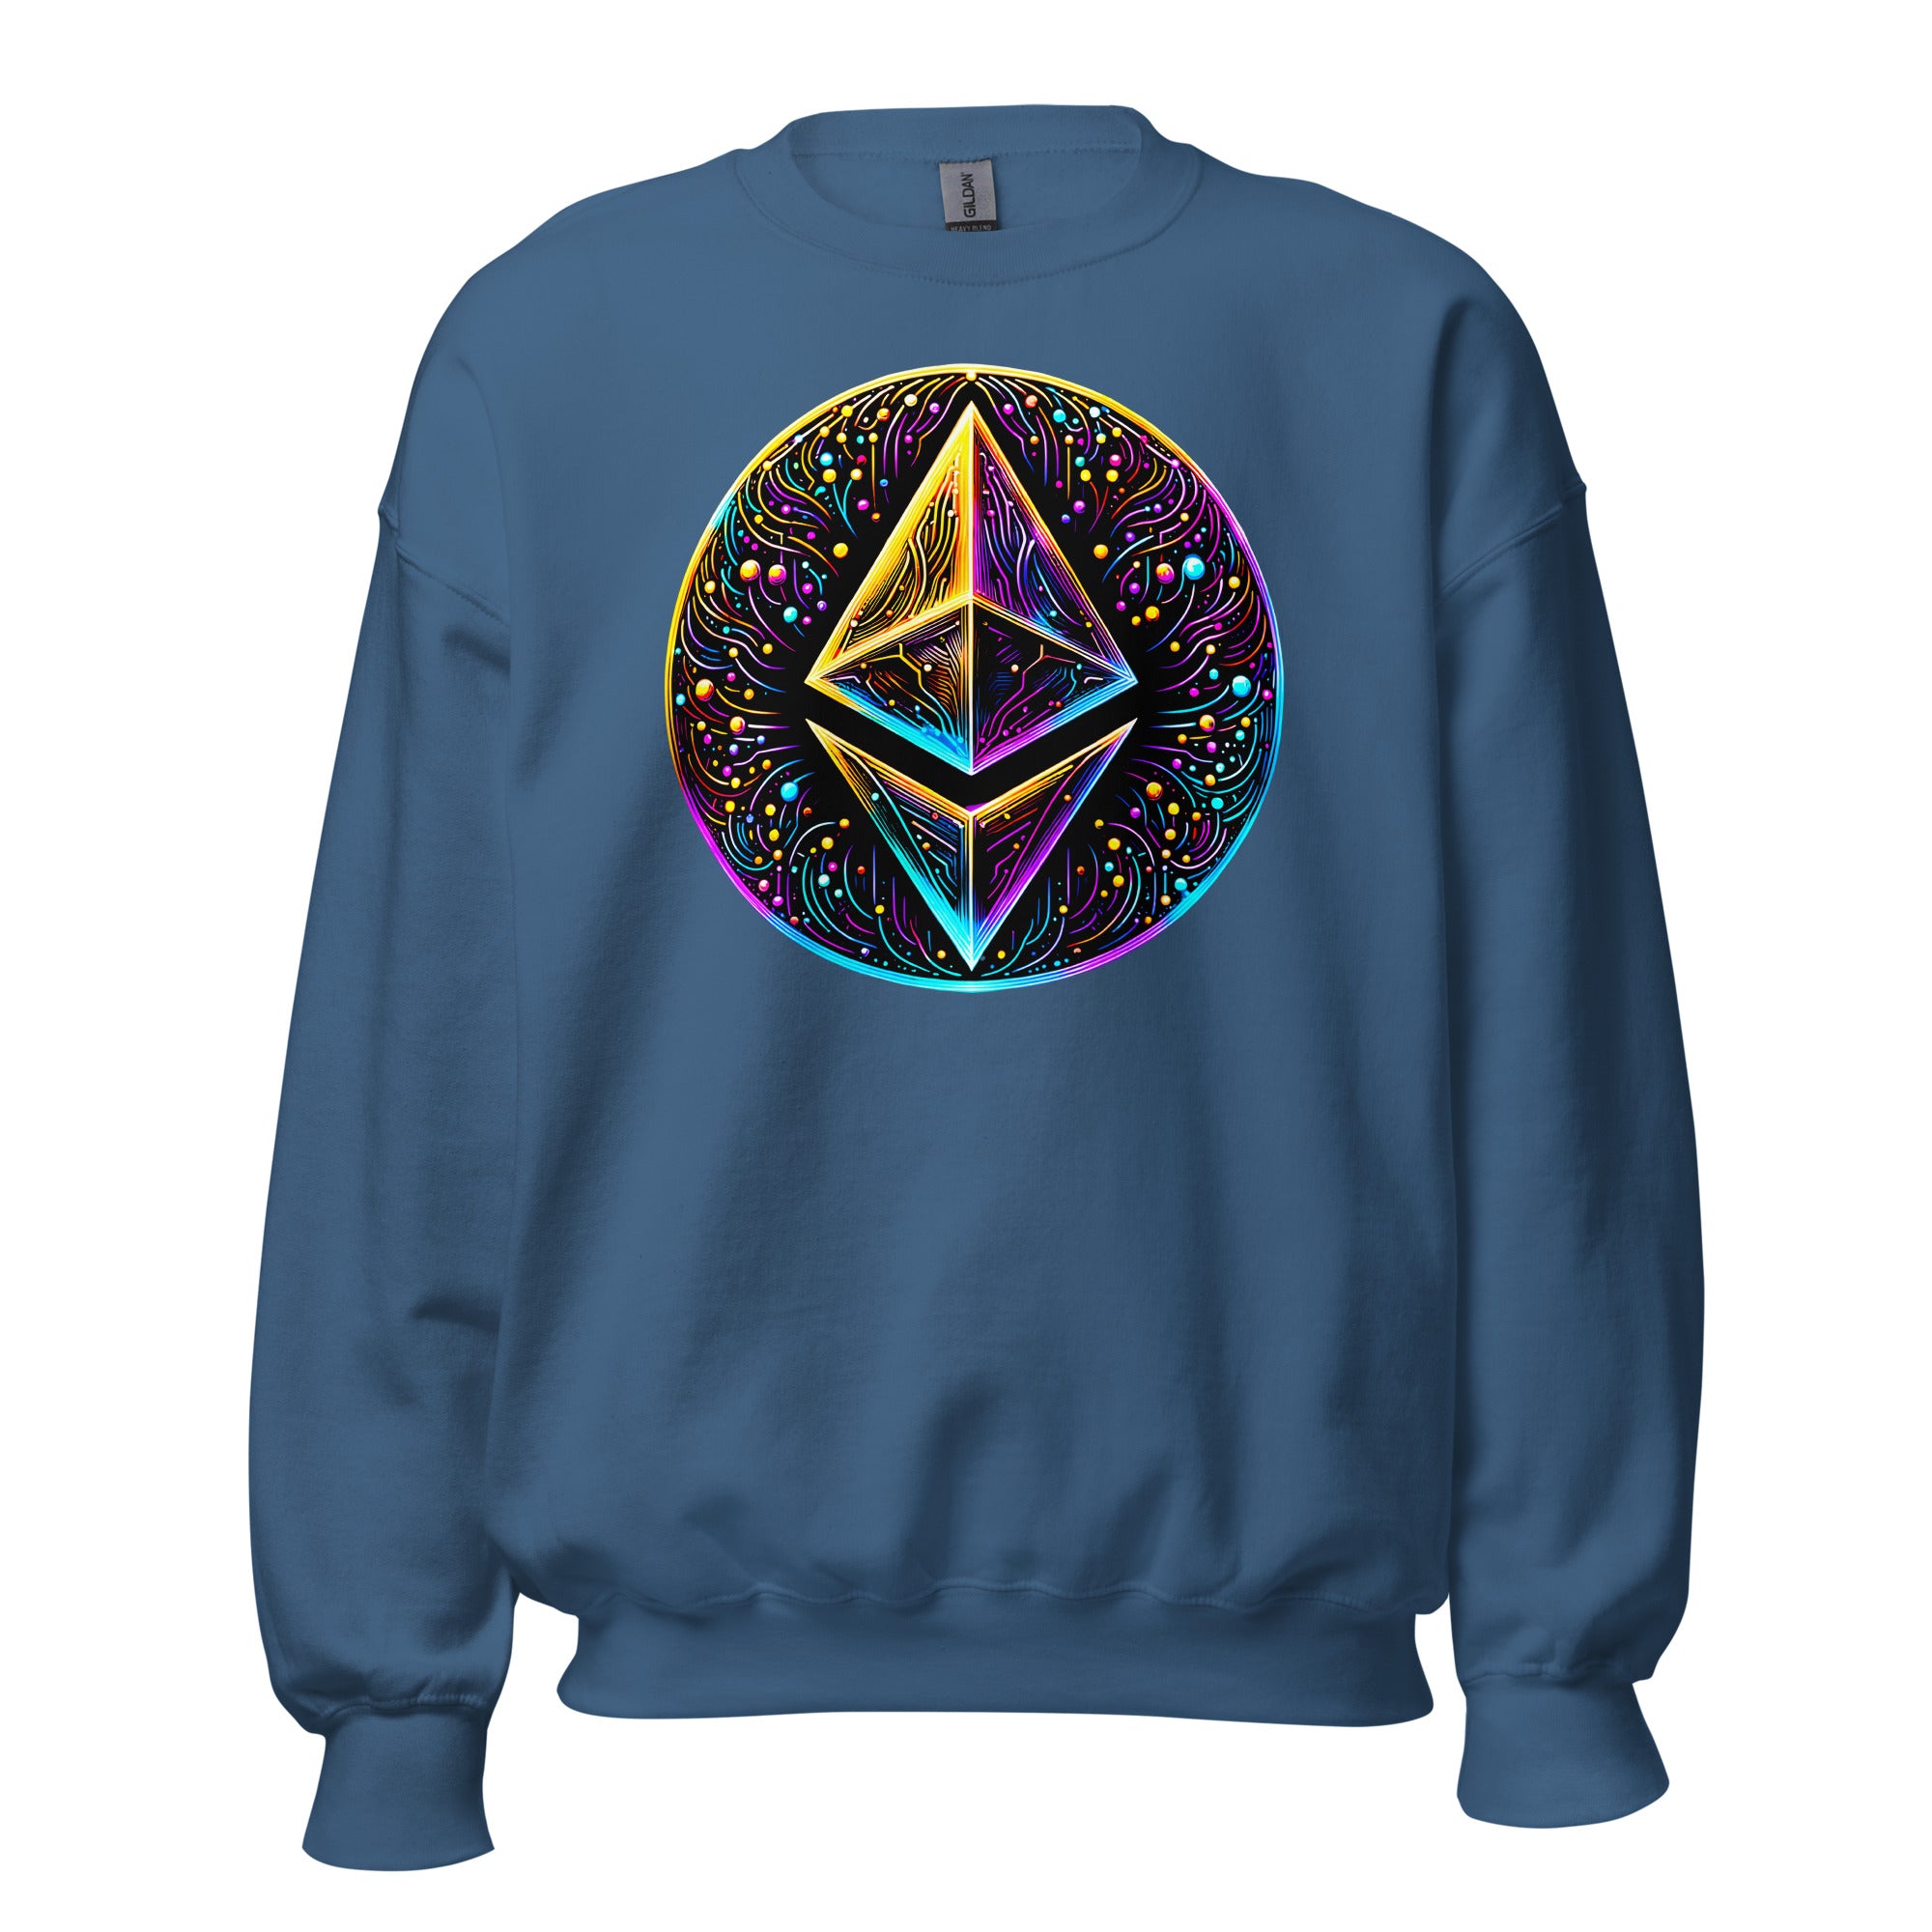 Whimsical Ethereum ETH Altcoin Crypto Symbol Sweatshirt Long Sleeve Pullover